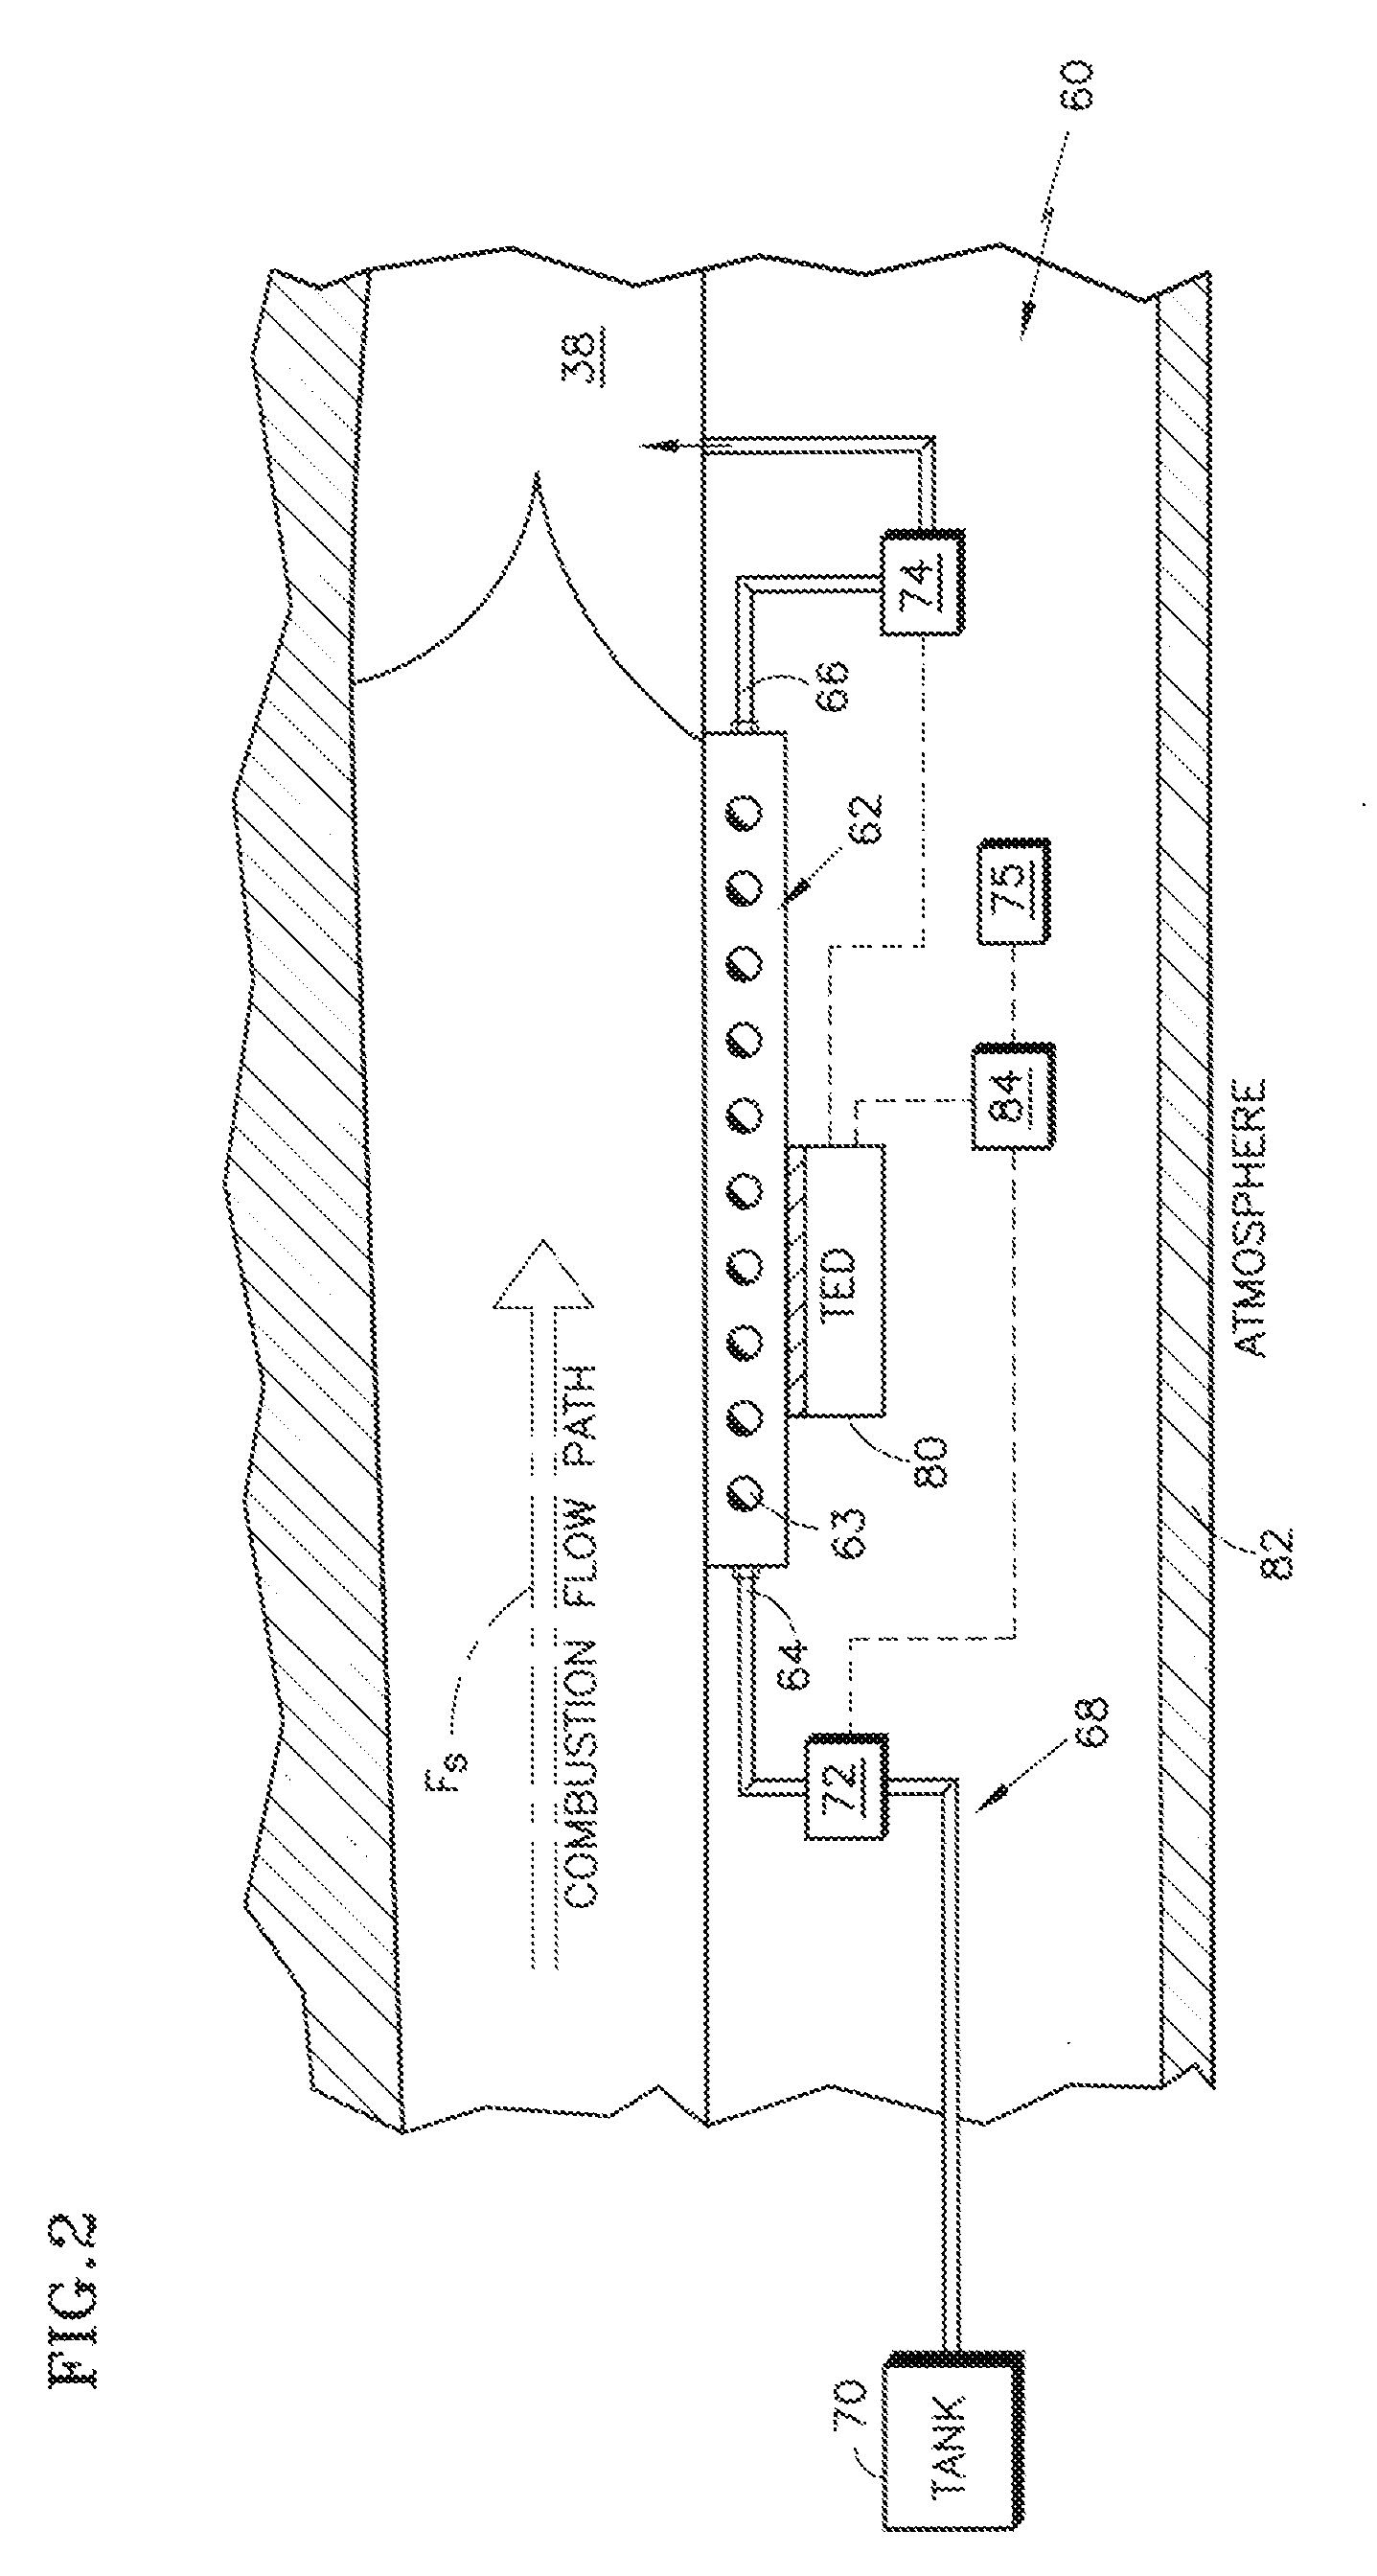 Flowpath heat exchanger for thermal management and power generation within a hypersonic vehicle